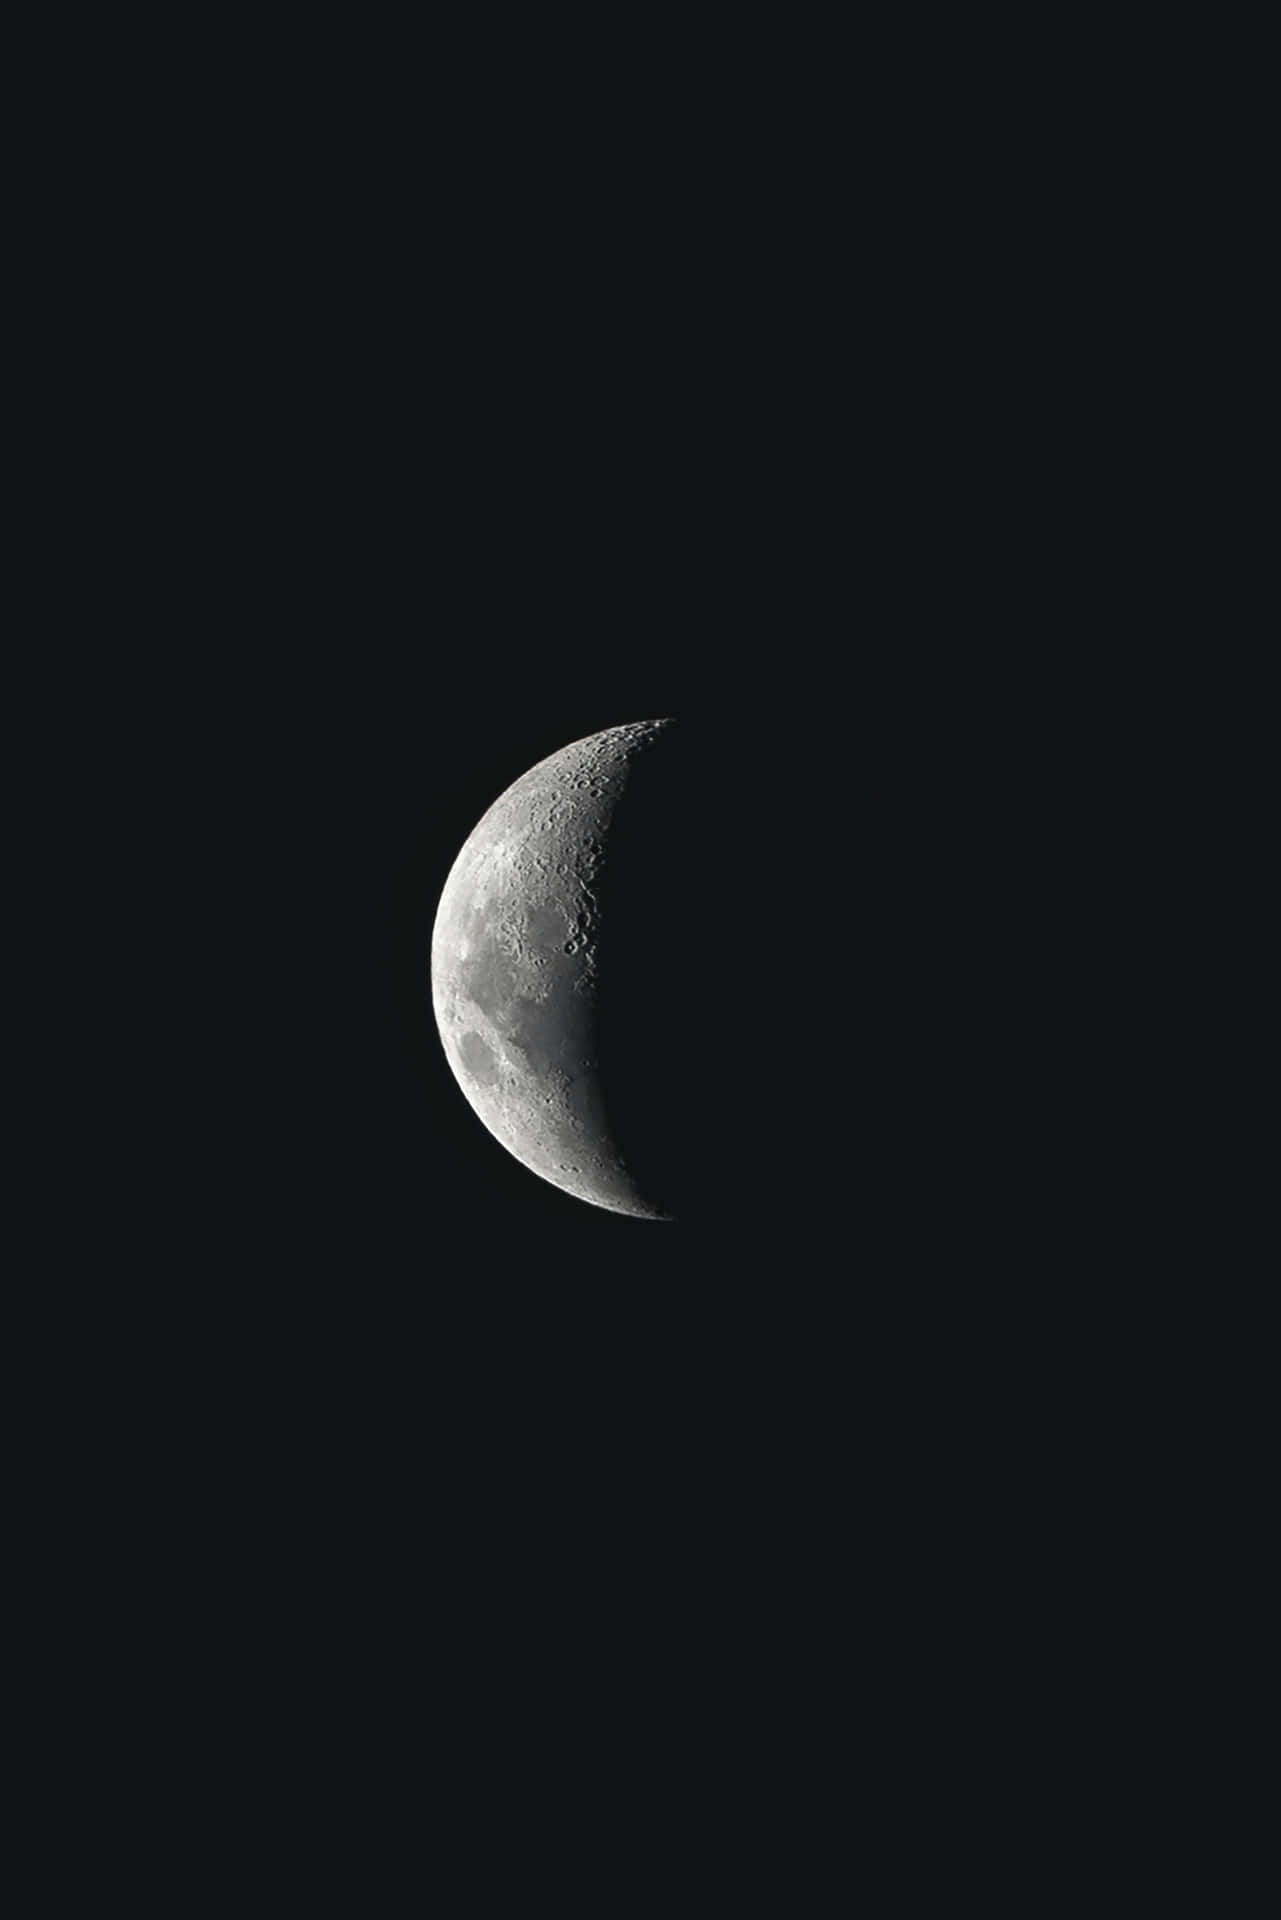 A Crescent Is Seen In The Dark Sky